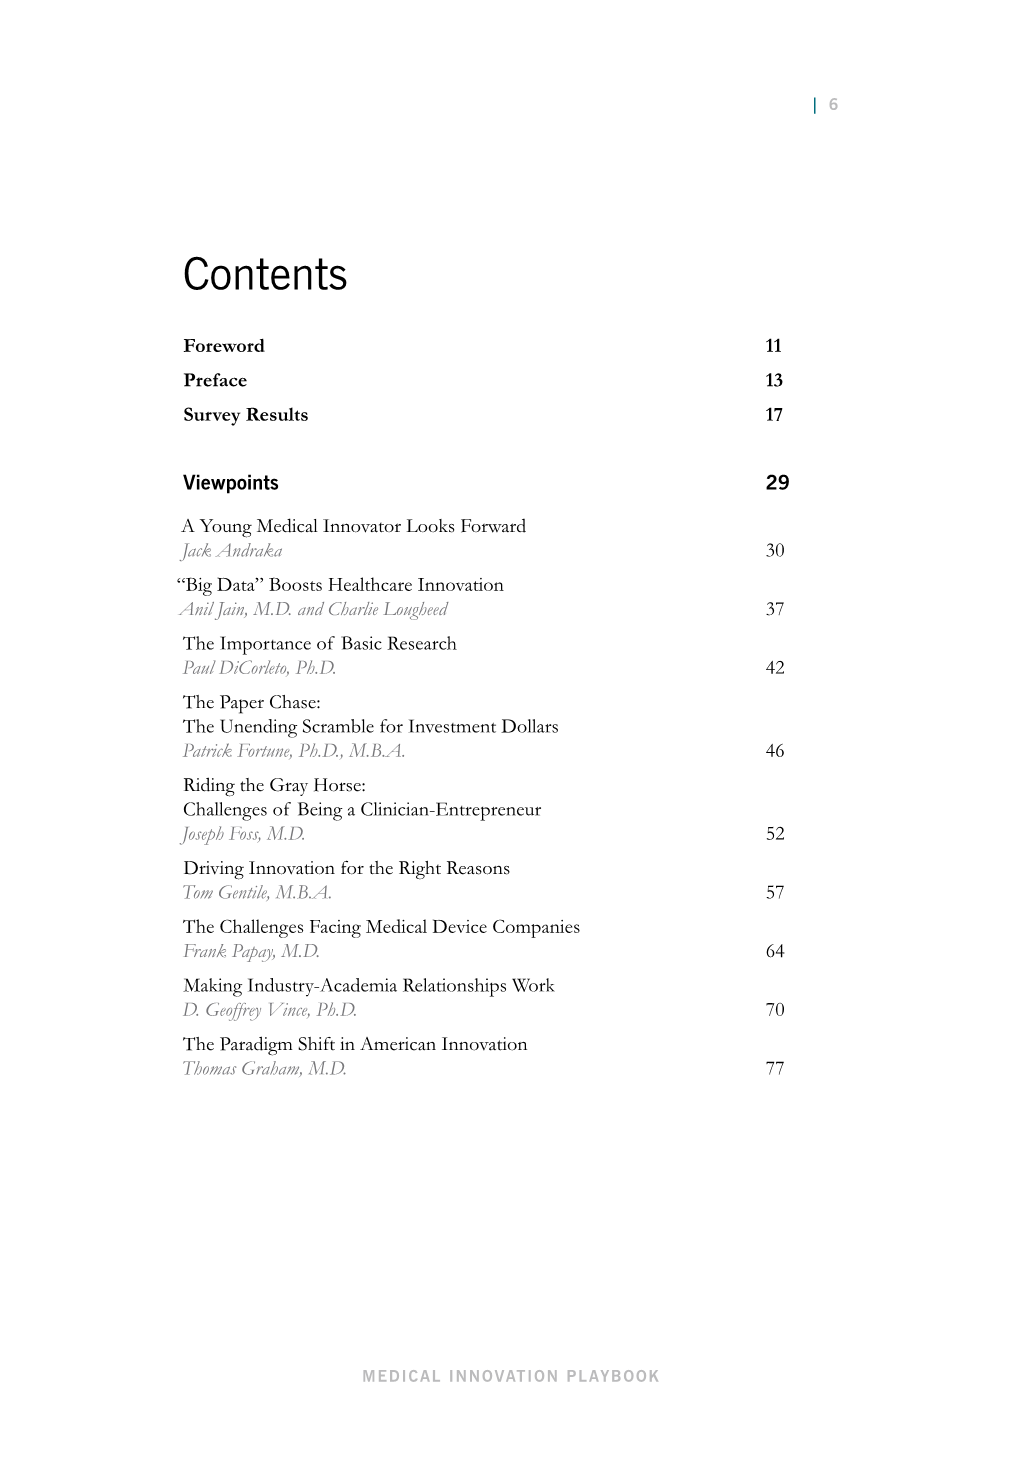 Complete Table of Contents